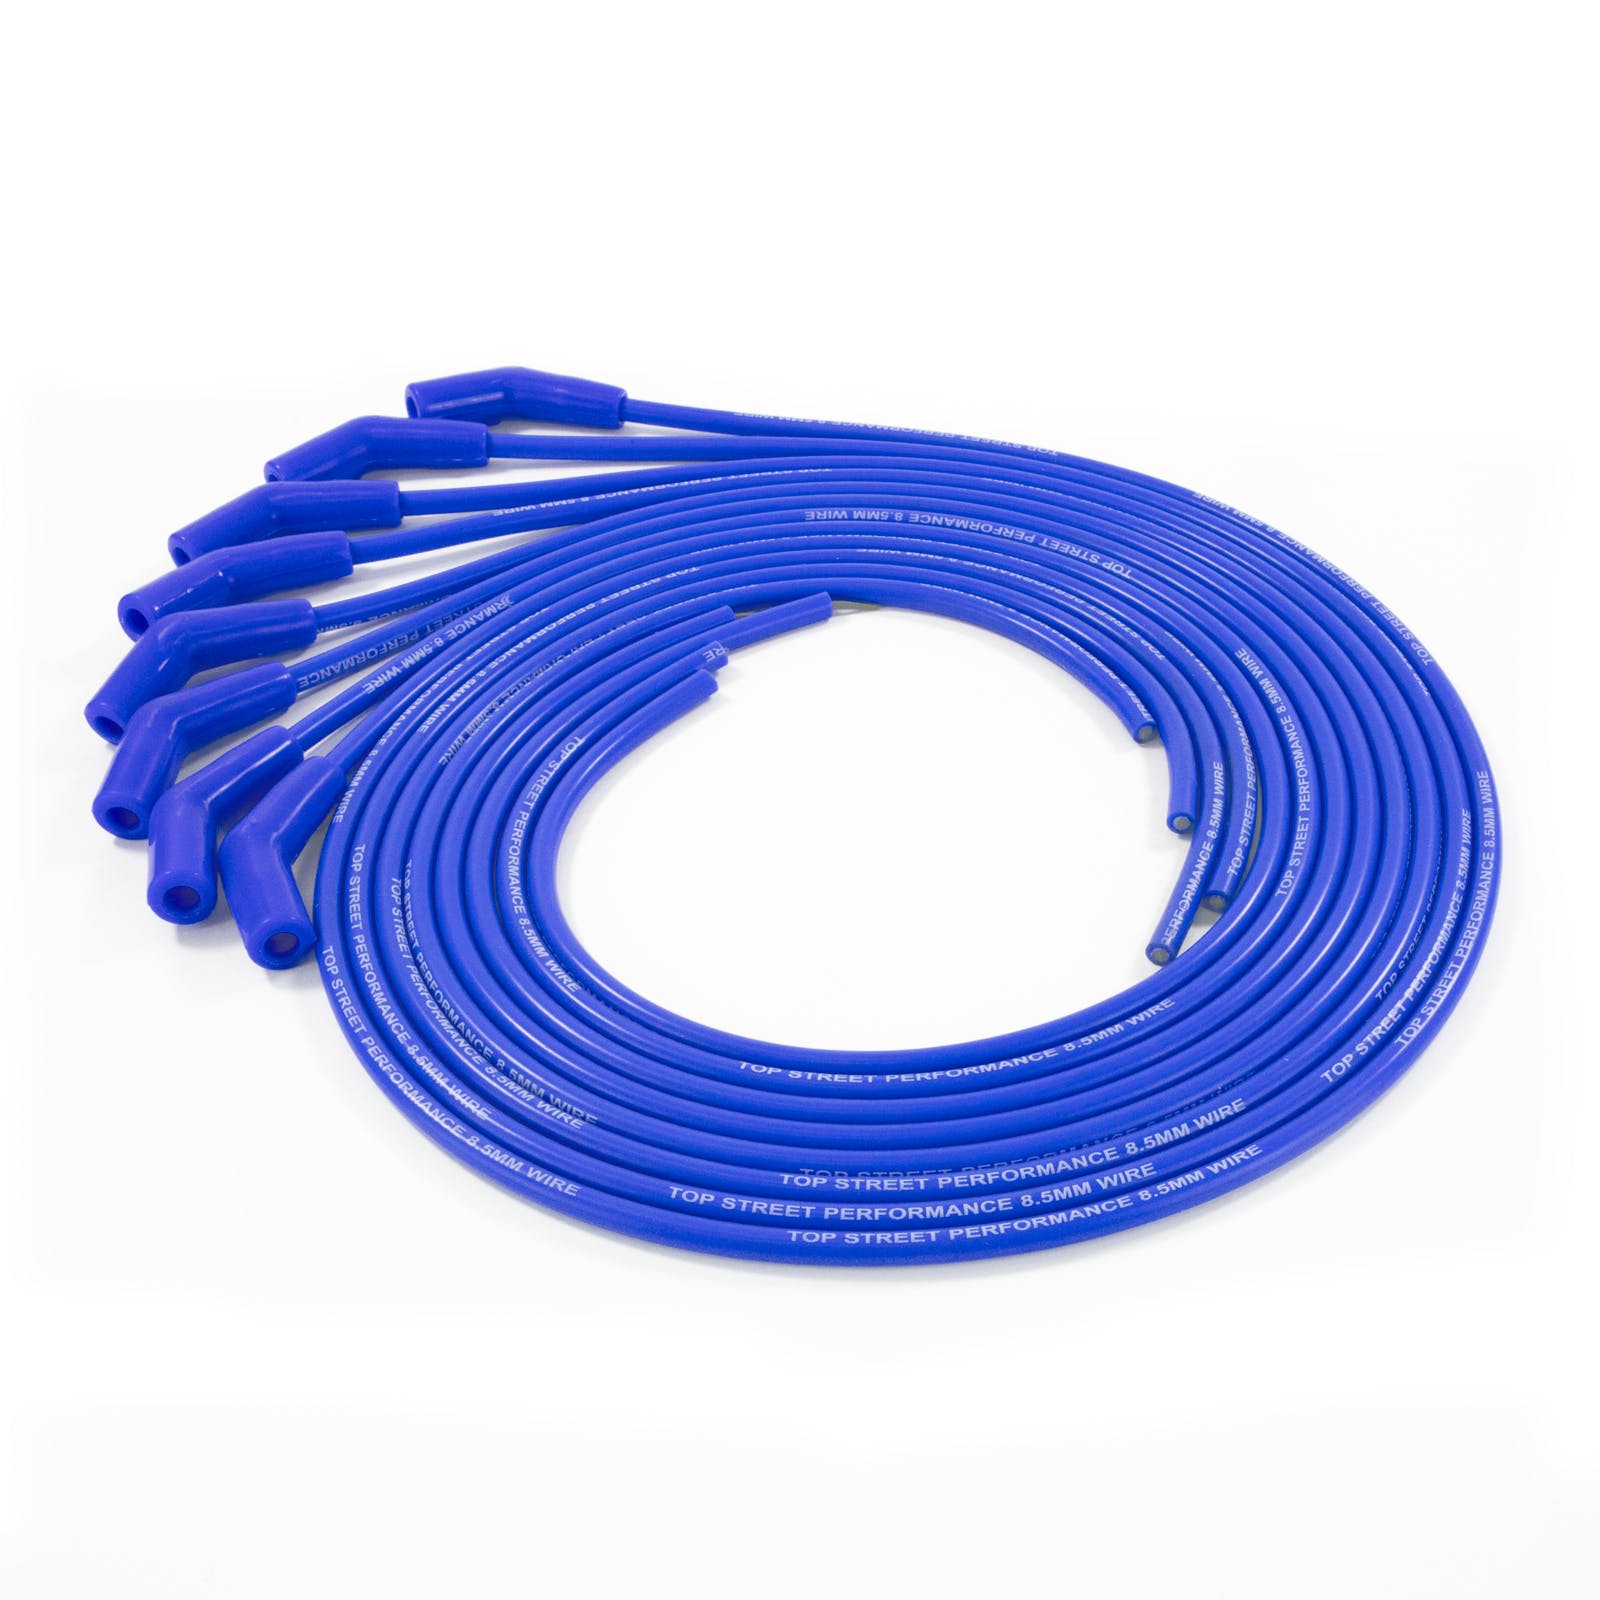 Top Street Performance 85635 8.5mm Universal Spark Plug Wire Set with 135° Plug Boots, Blue